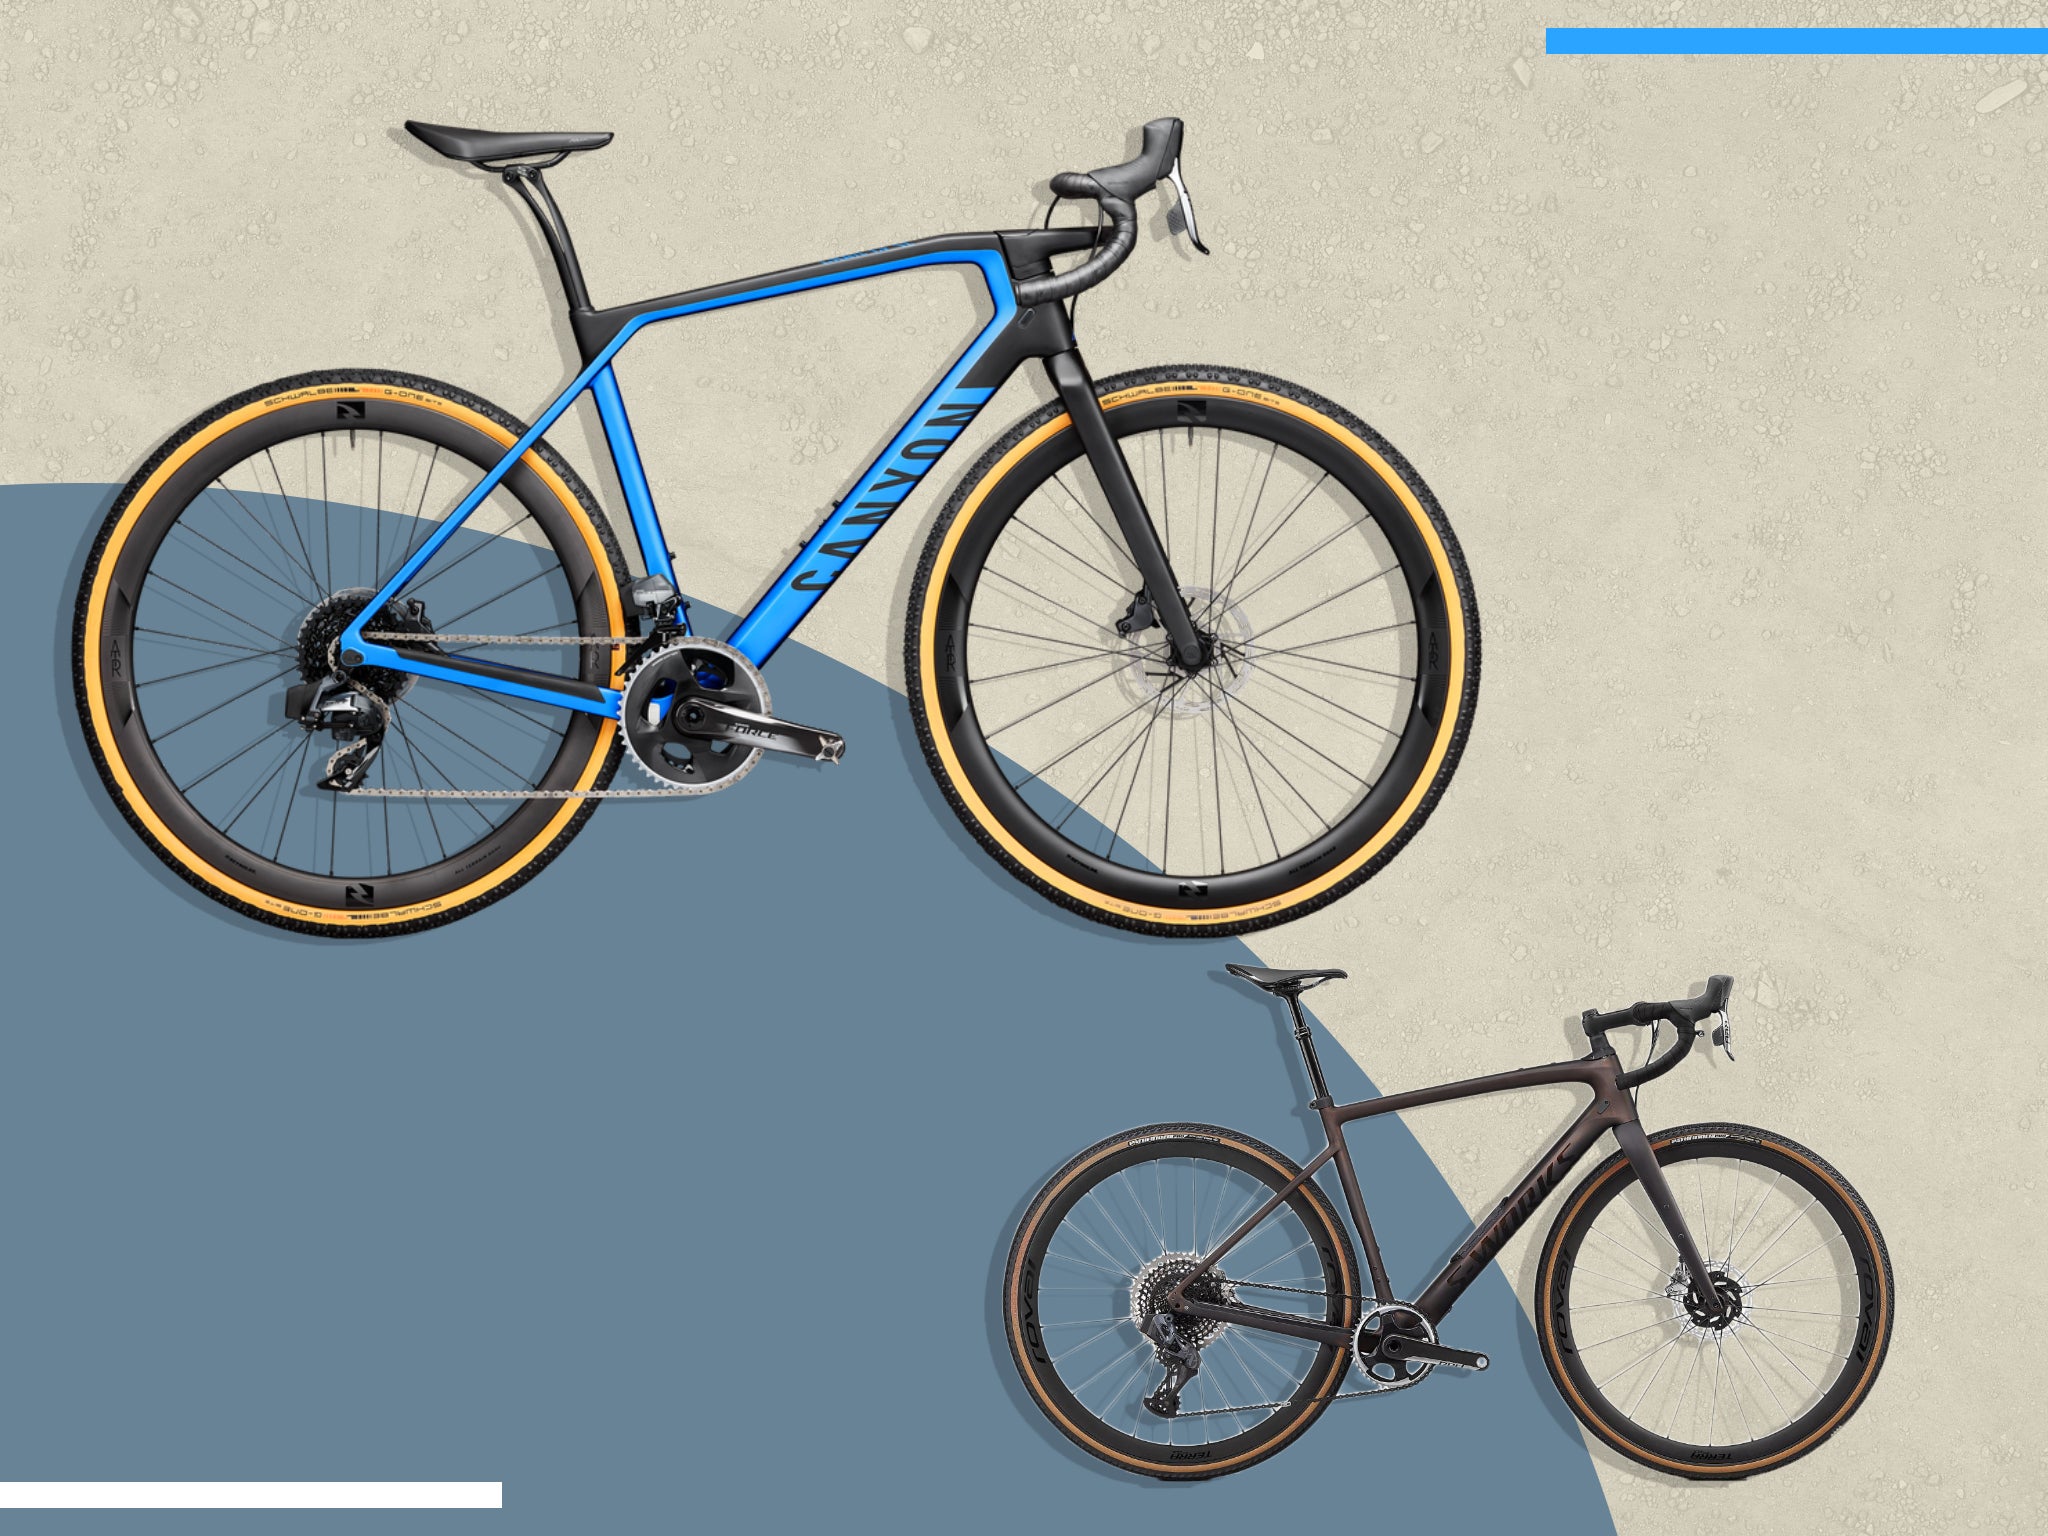 Gravel bikes are great for exploring and also make excellent all-rounders for those who don’t want to commit to either a road bike or a mountain bike